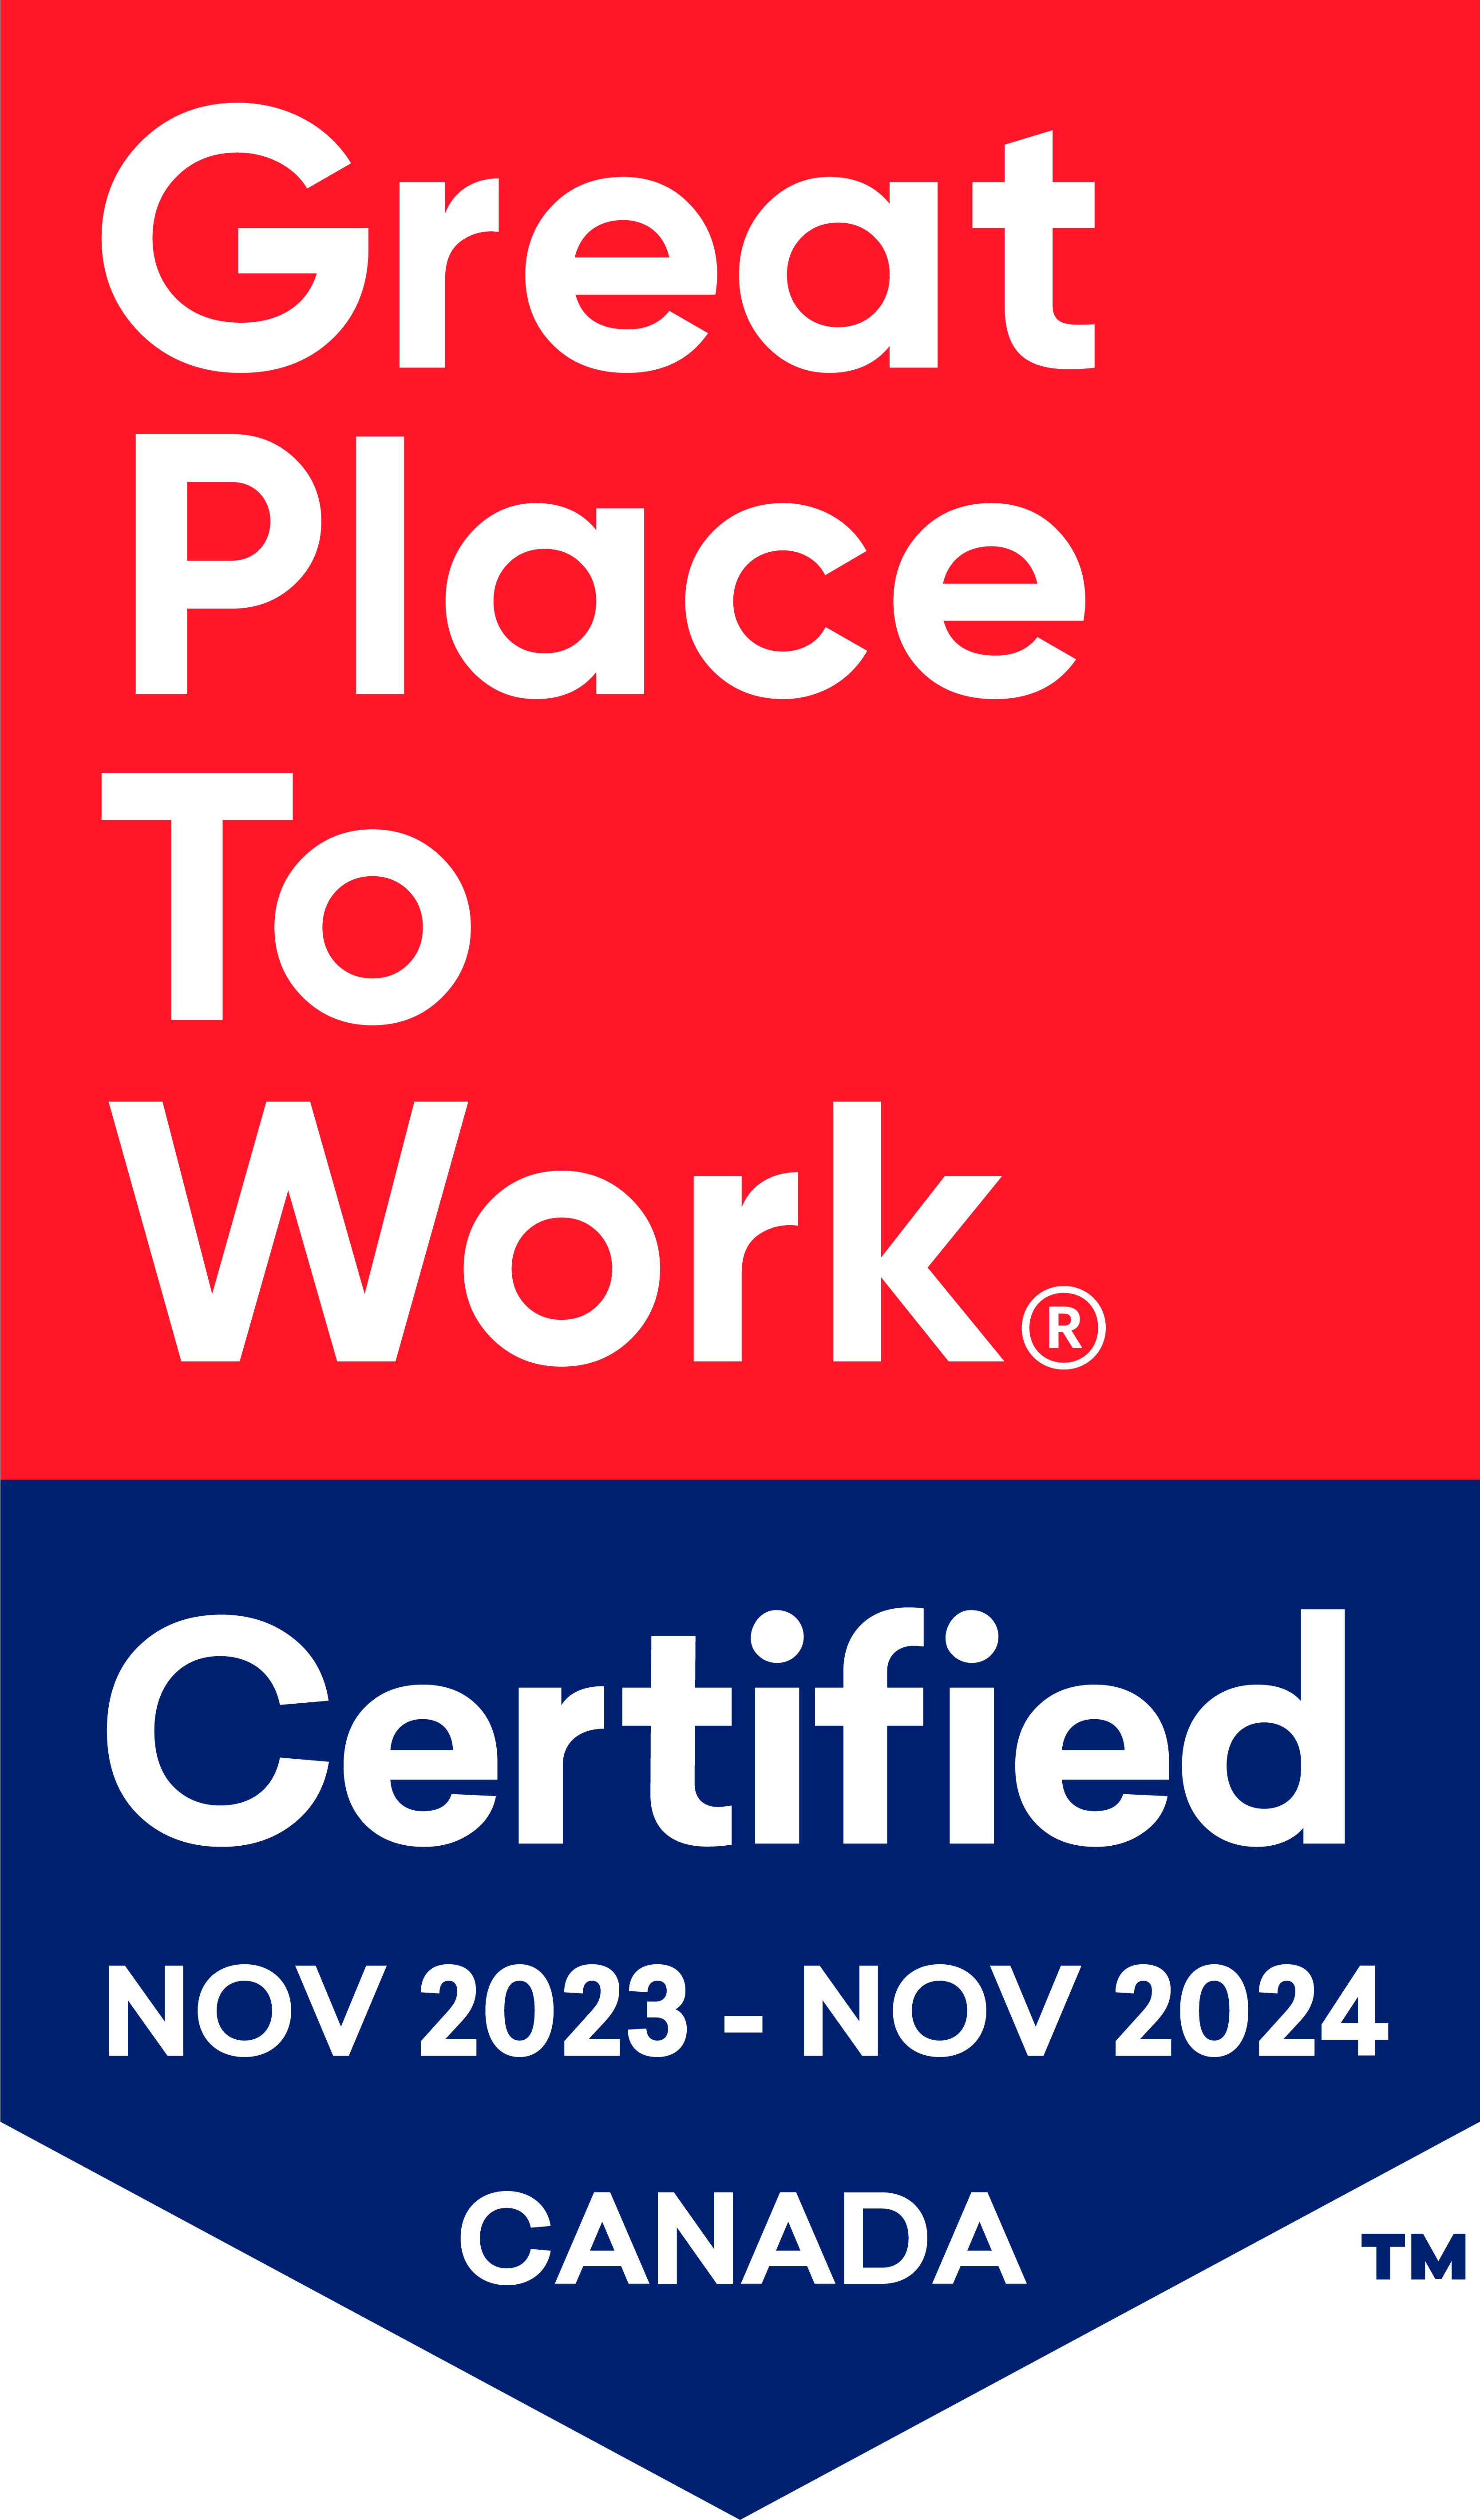 https://www.mcinnescooper.com/content/uploads/2023/11/mcinnes-cooper-achieves-great-place-to-work-certification-for-2023-2024.png